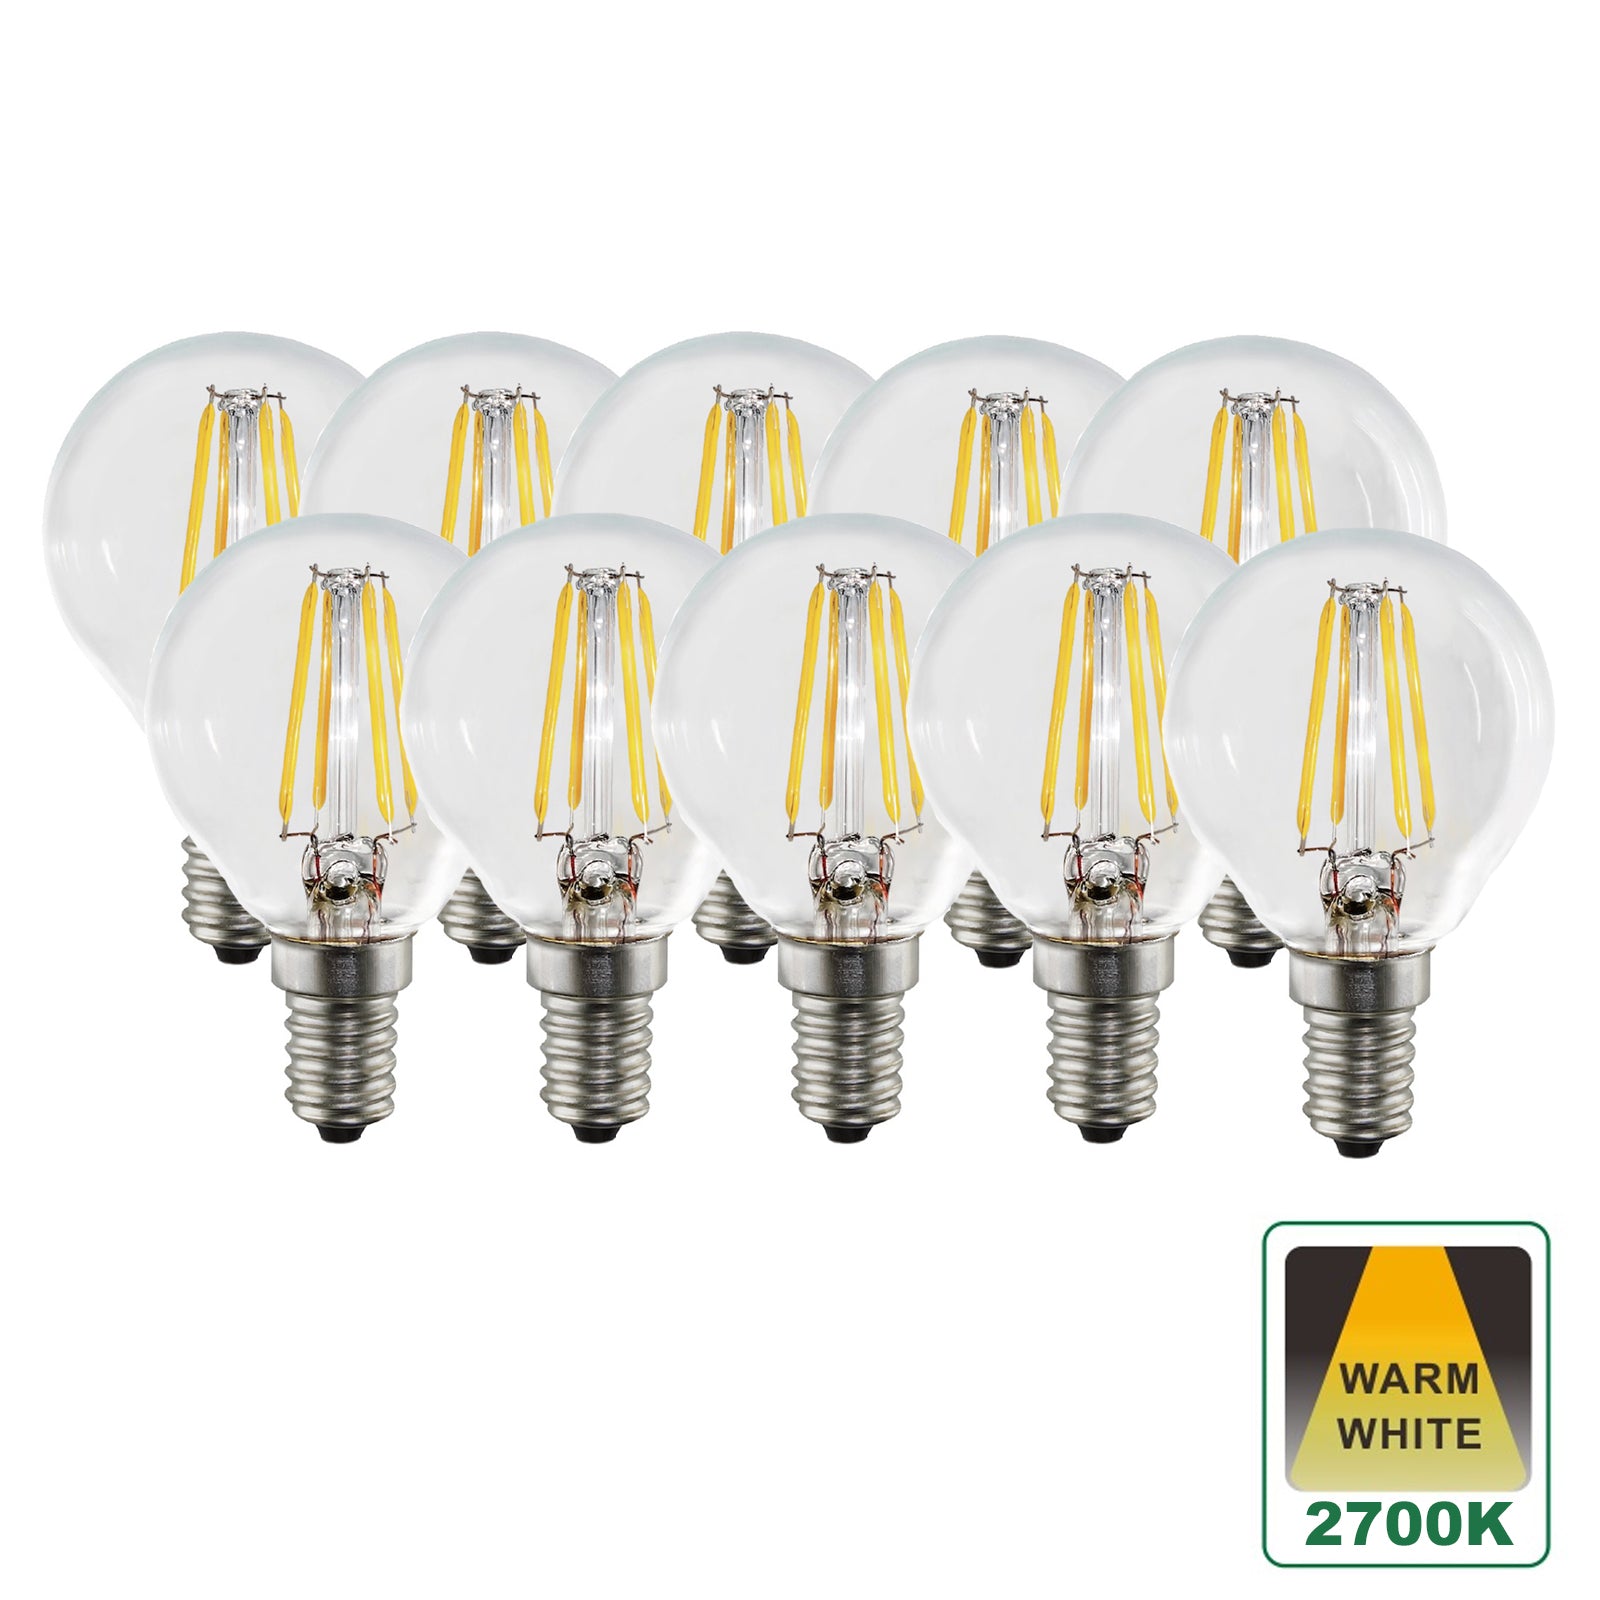 Harper Living E14 4.5W Clear Glass Warm White Dimmable Golf LED Bulbs, Pack of 10